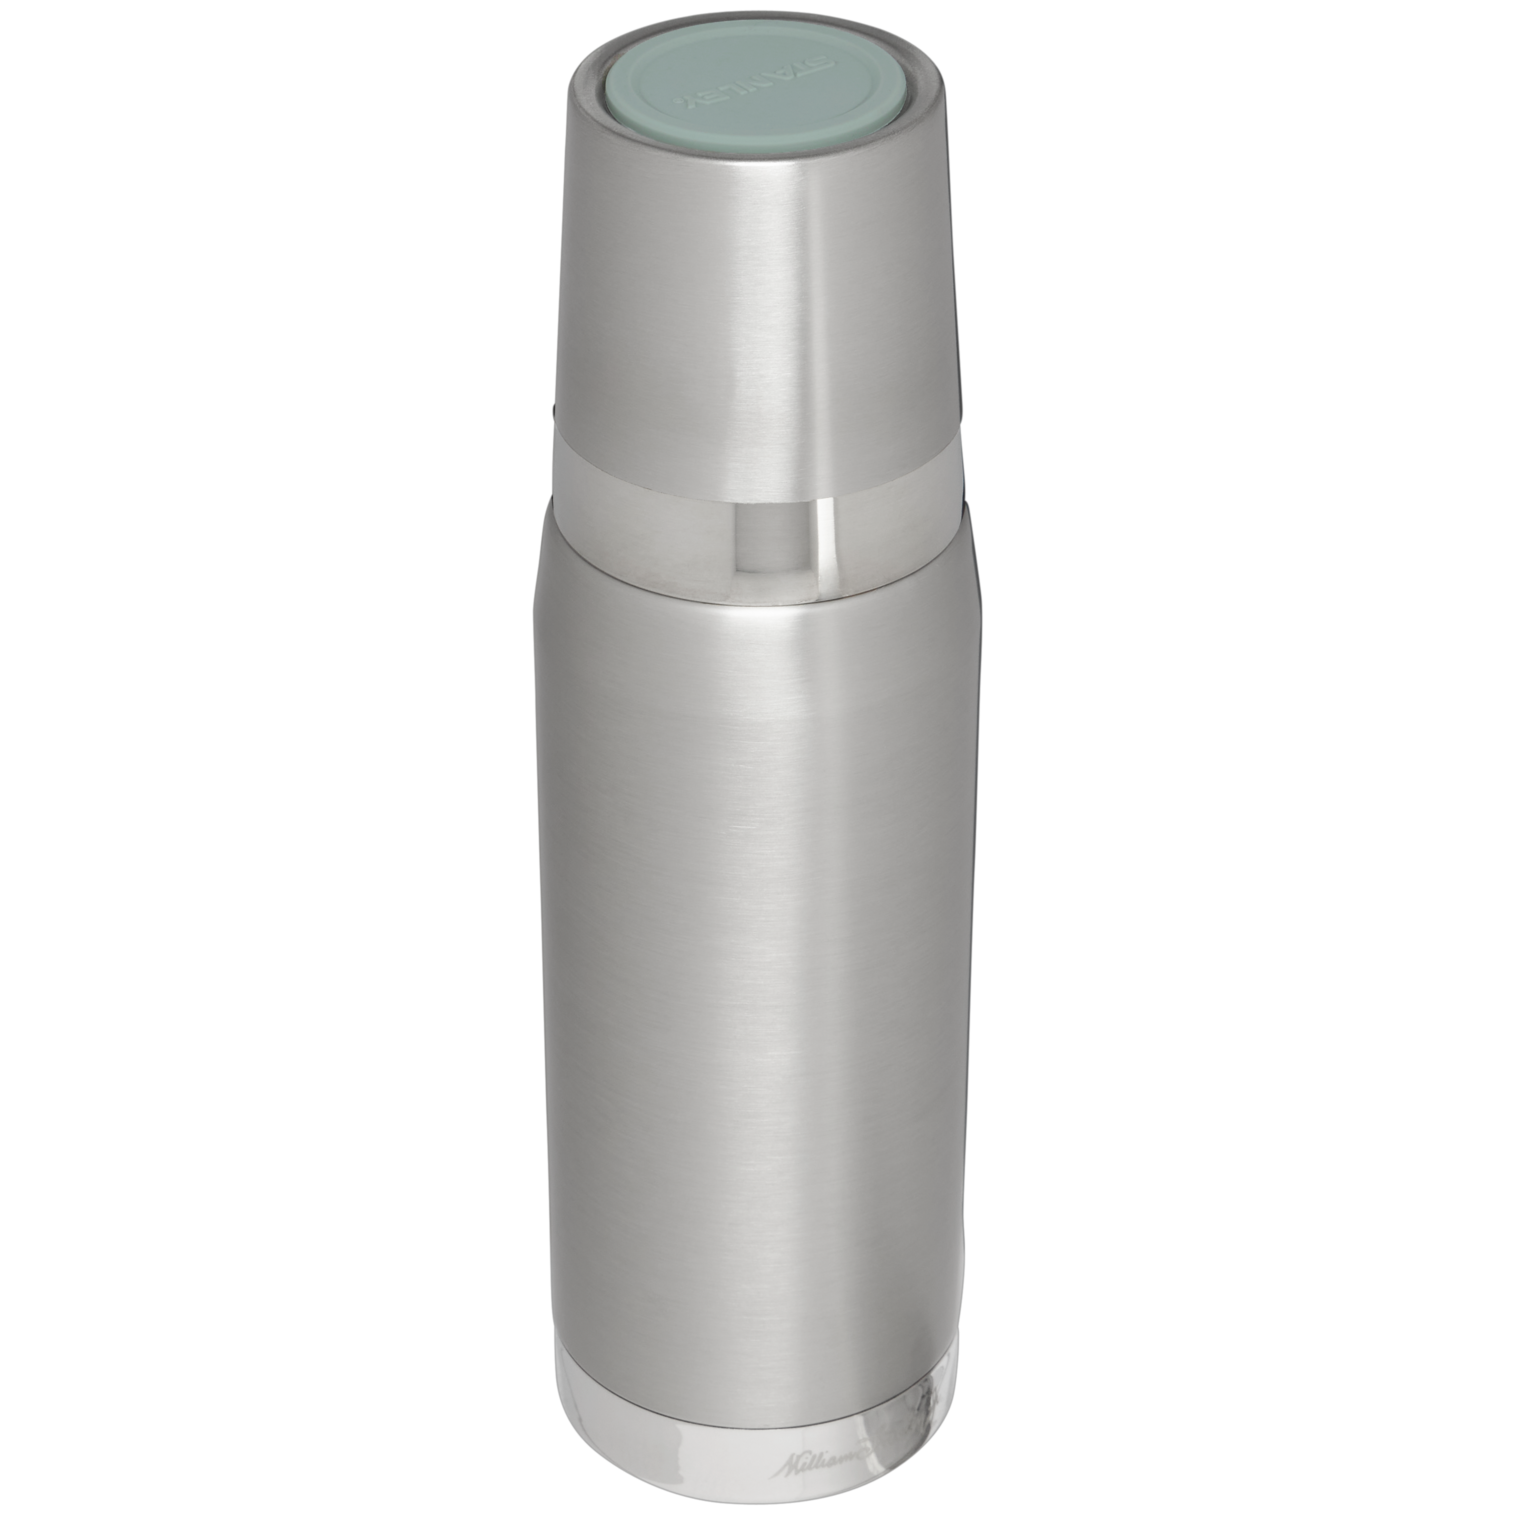 Stanley Forge Thermal Bottle | 1.4 qt, Stainless Steel Shale